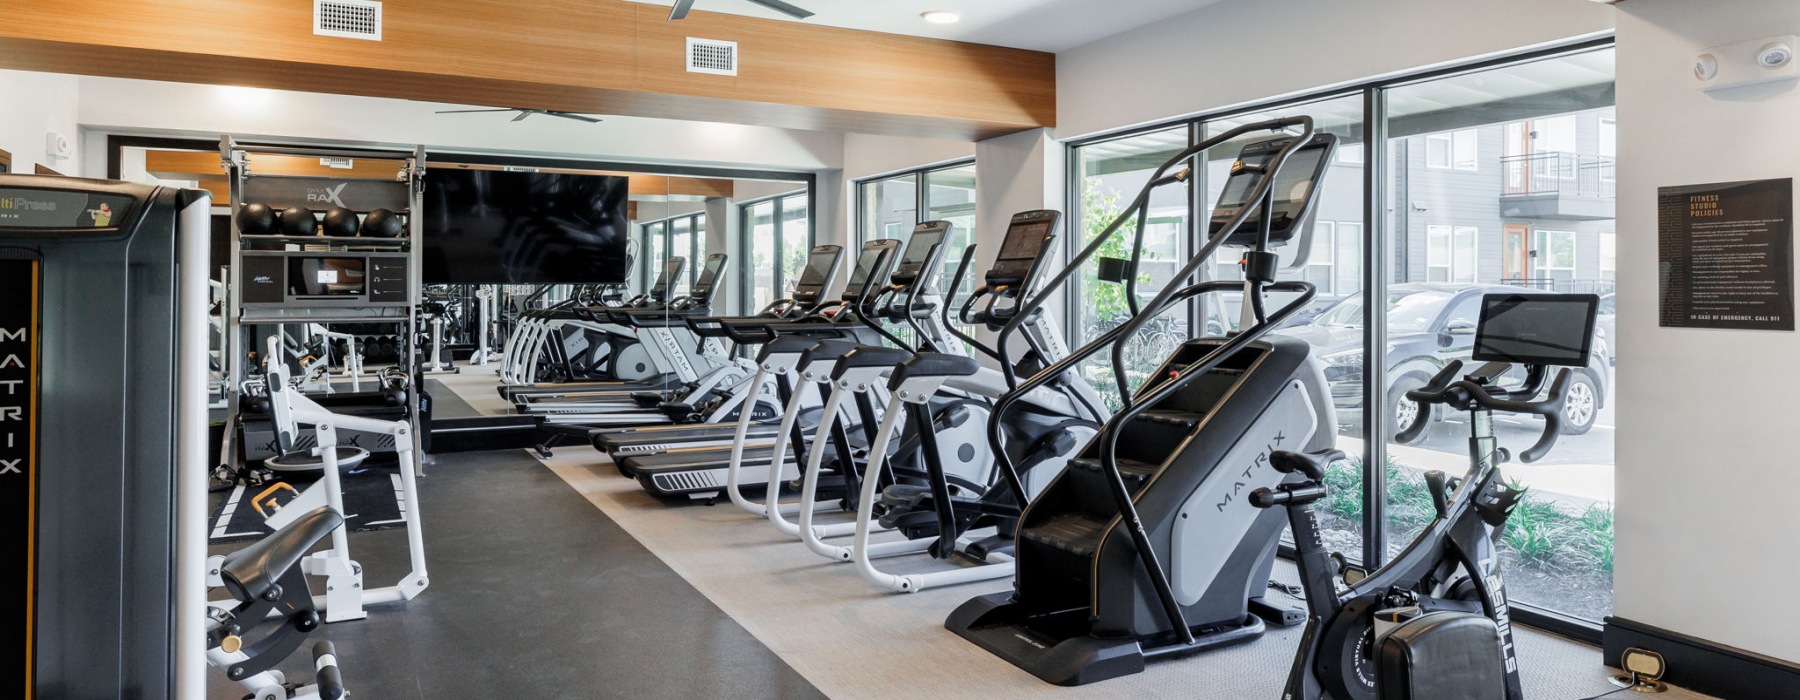 Fitness center in east austin apartment complex